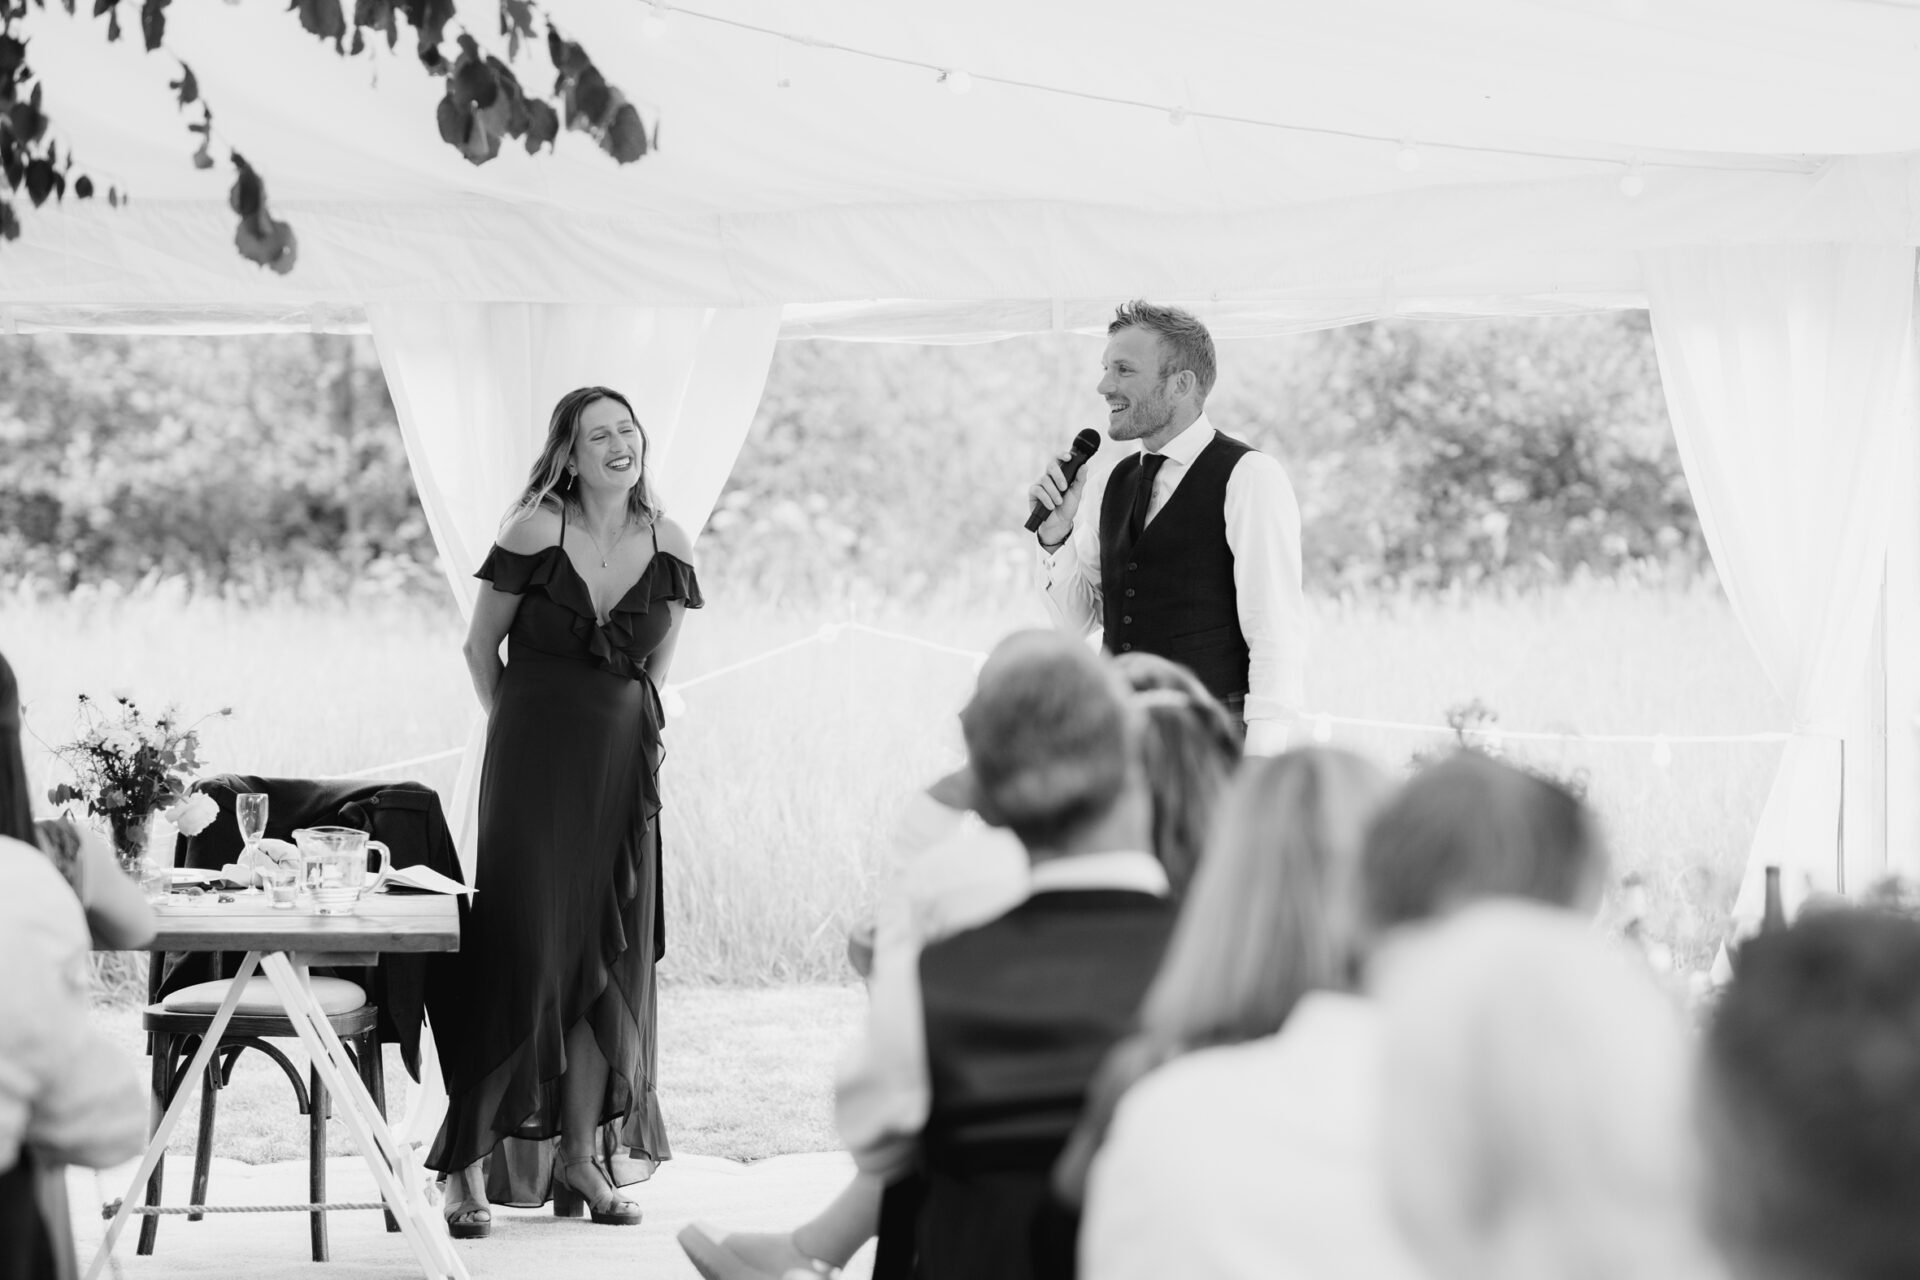 The maid of honour and best man give a wedding speech